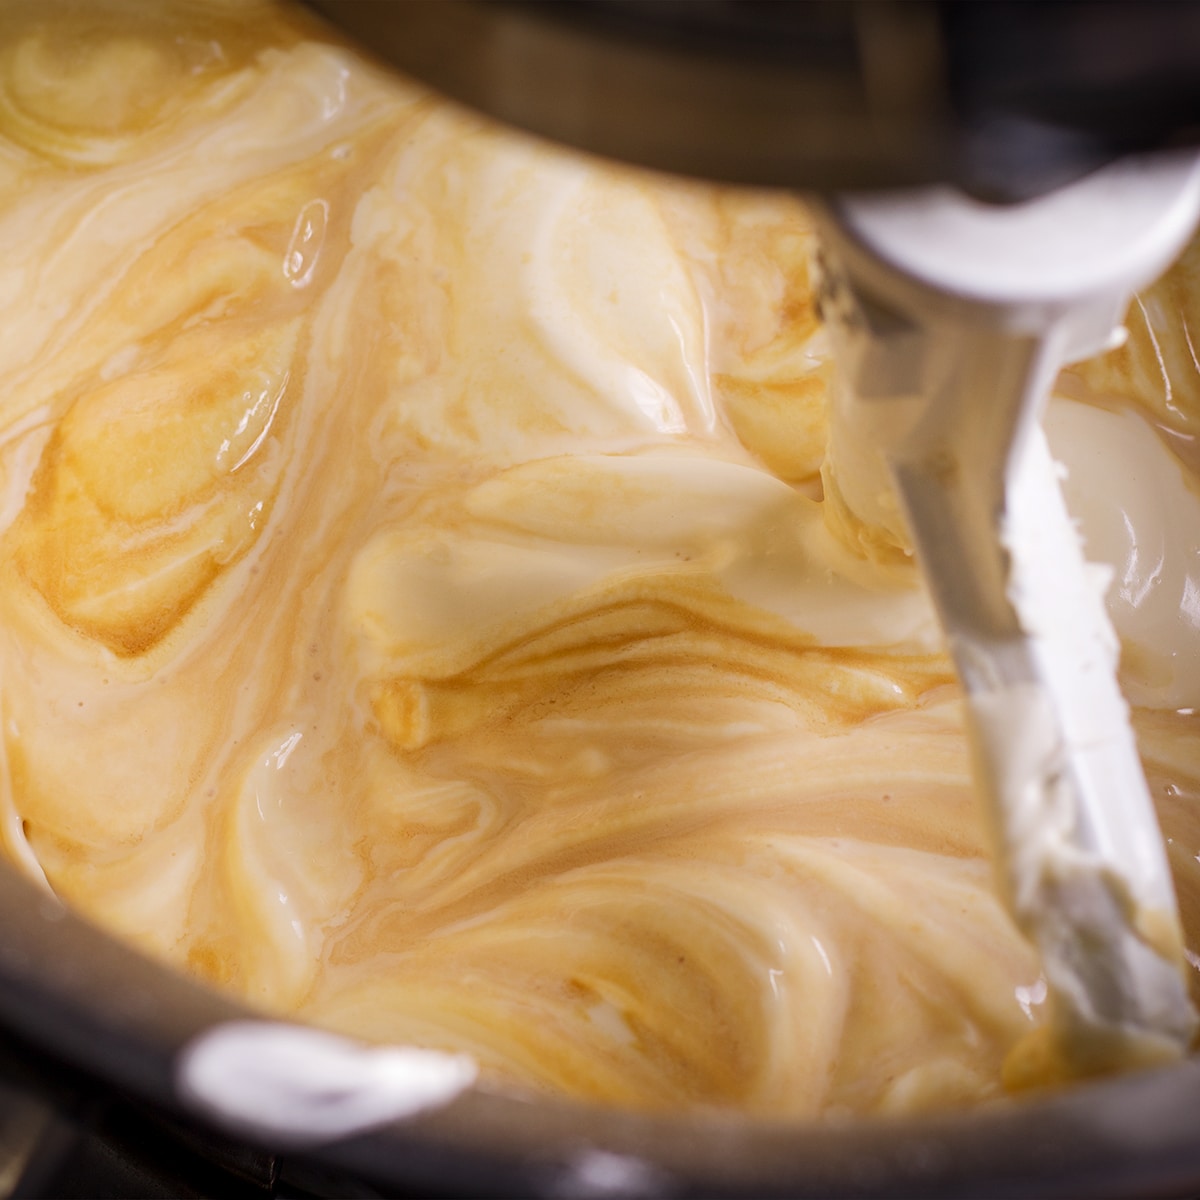 Using an electric mixer to beat vanilla and heavy cream into cheesecake batter.